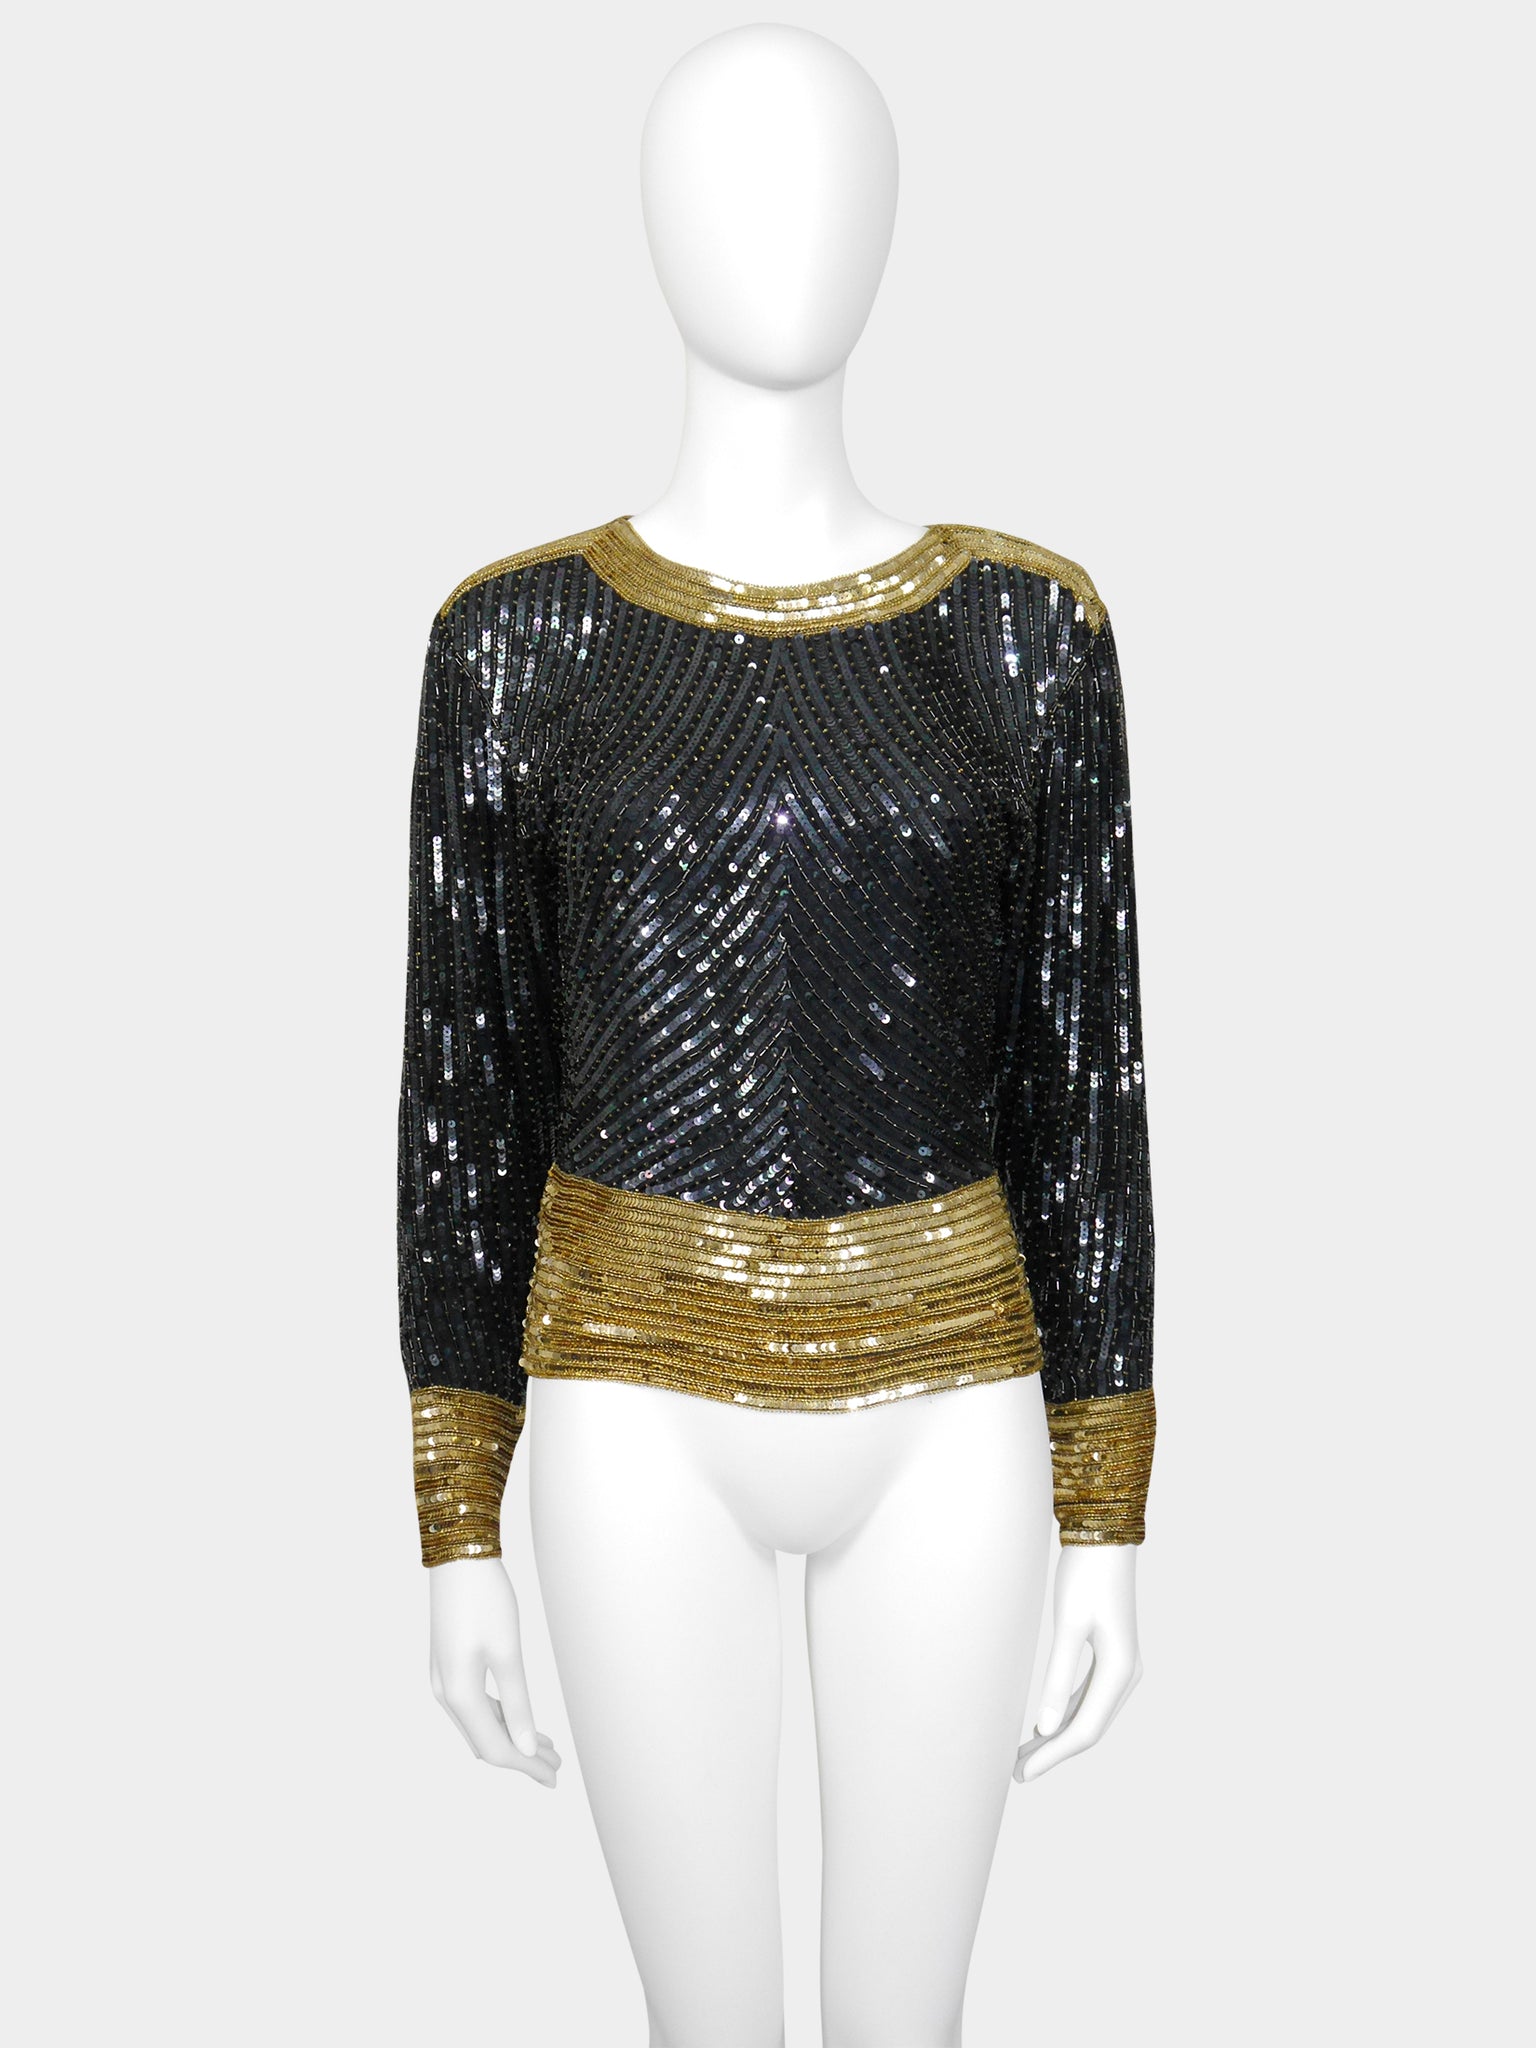 YVES SAINT LAURENT 1980s Vintage Beaded Sequined Evening Top Size XS-S